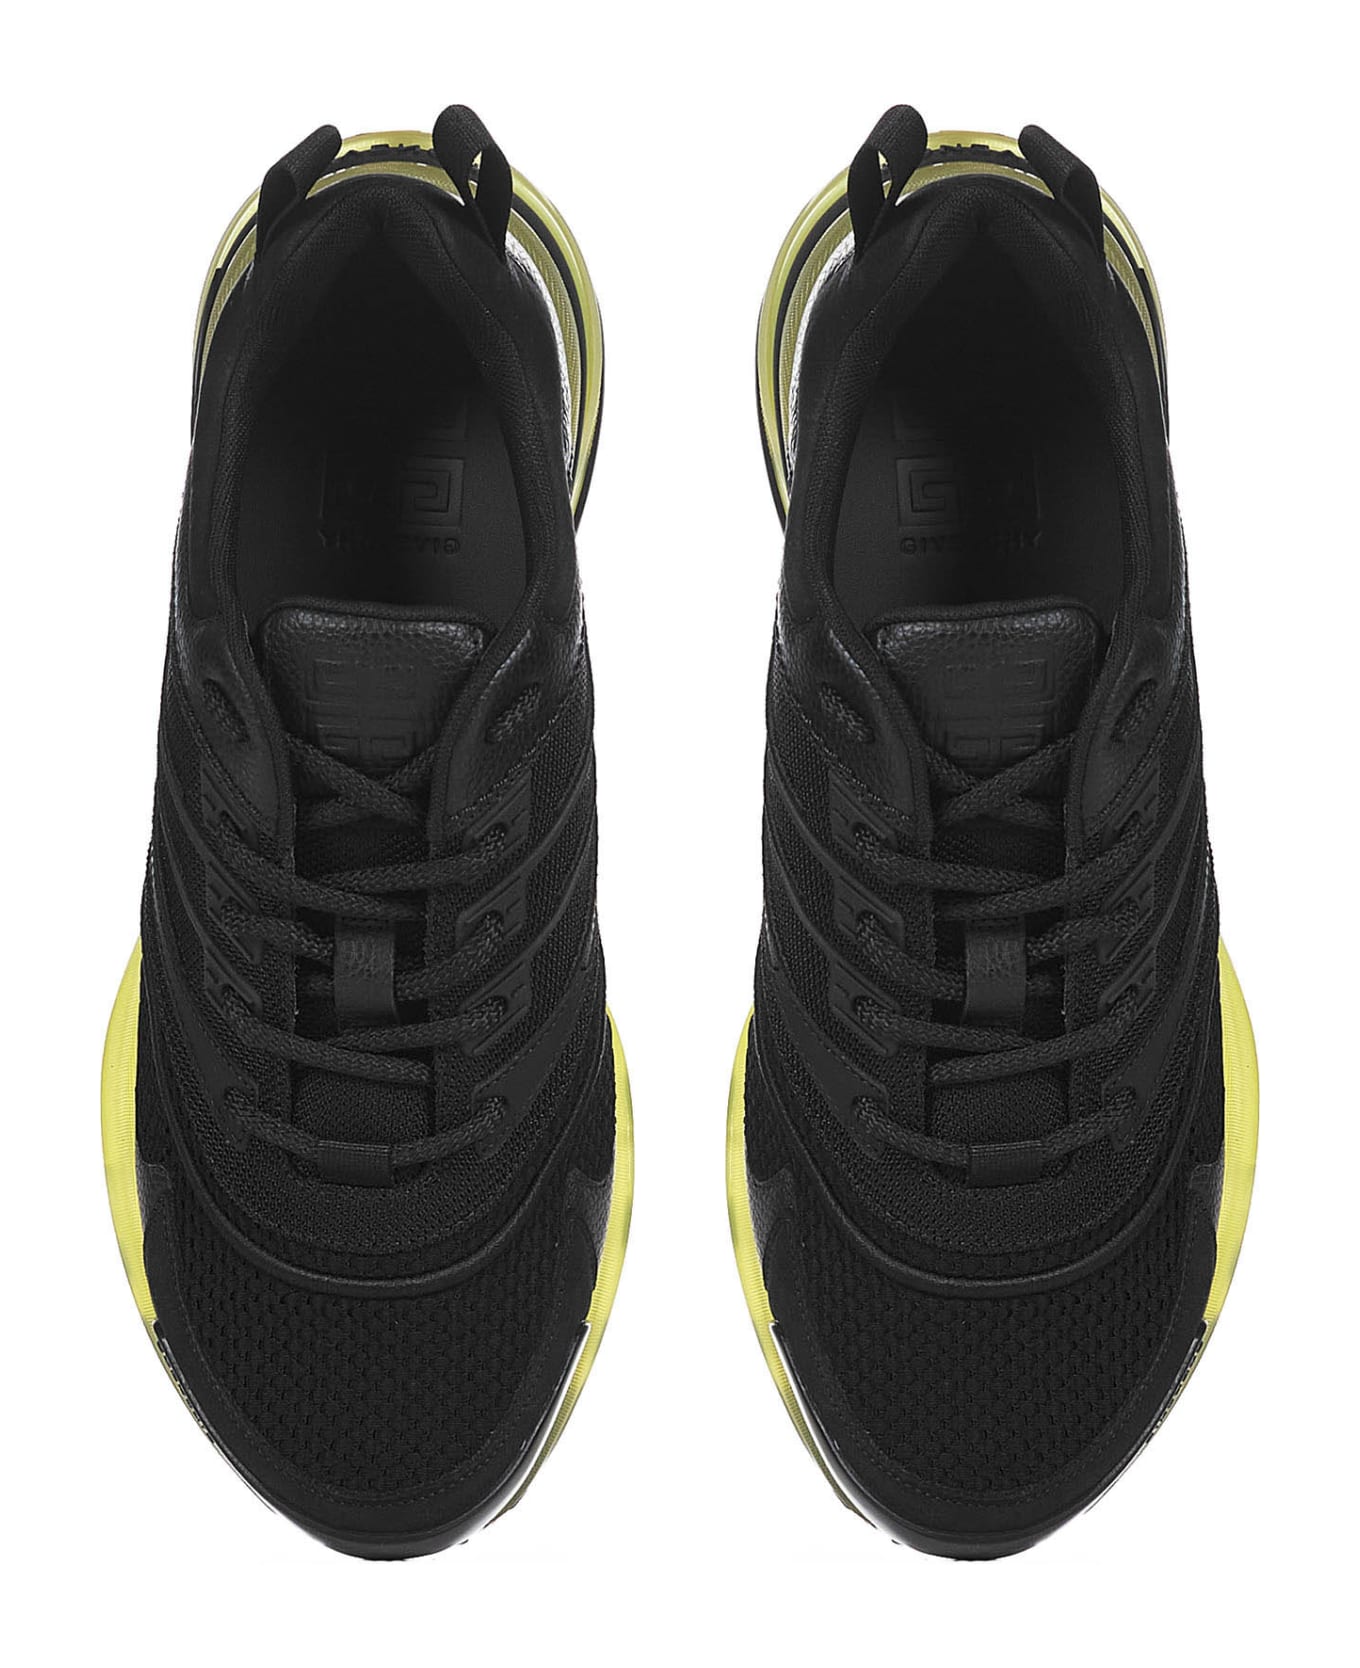 Givenchy Giv 1 Sneakers